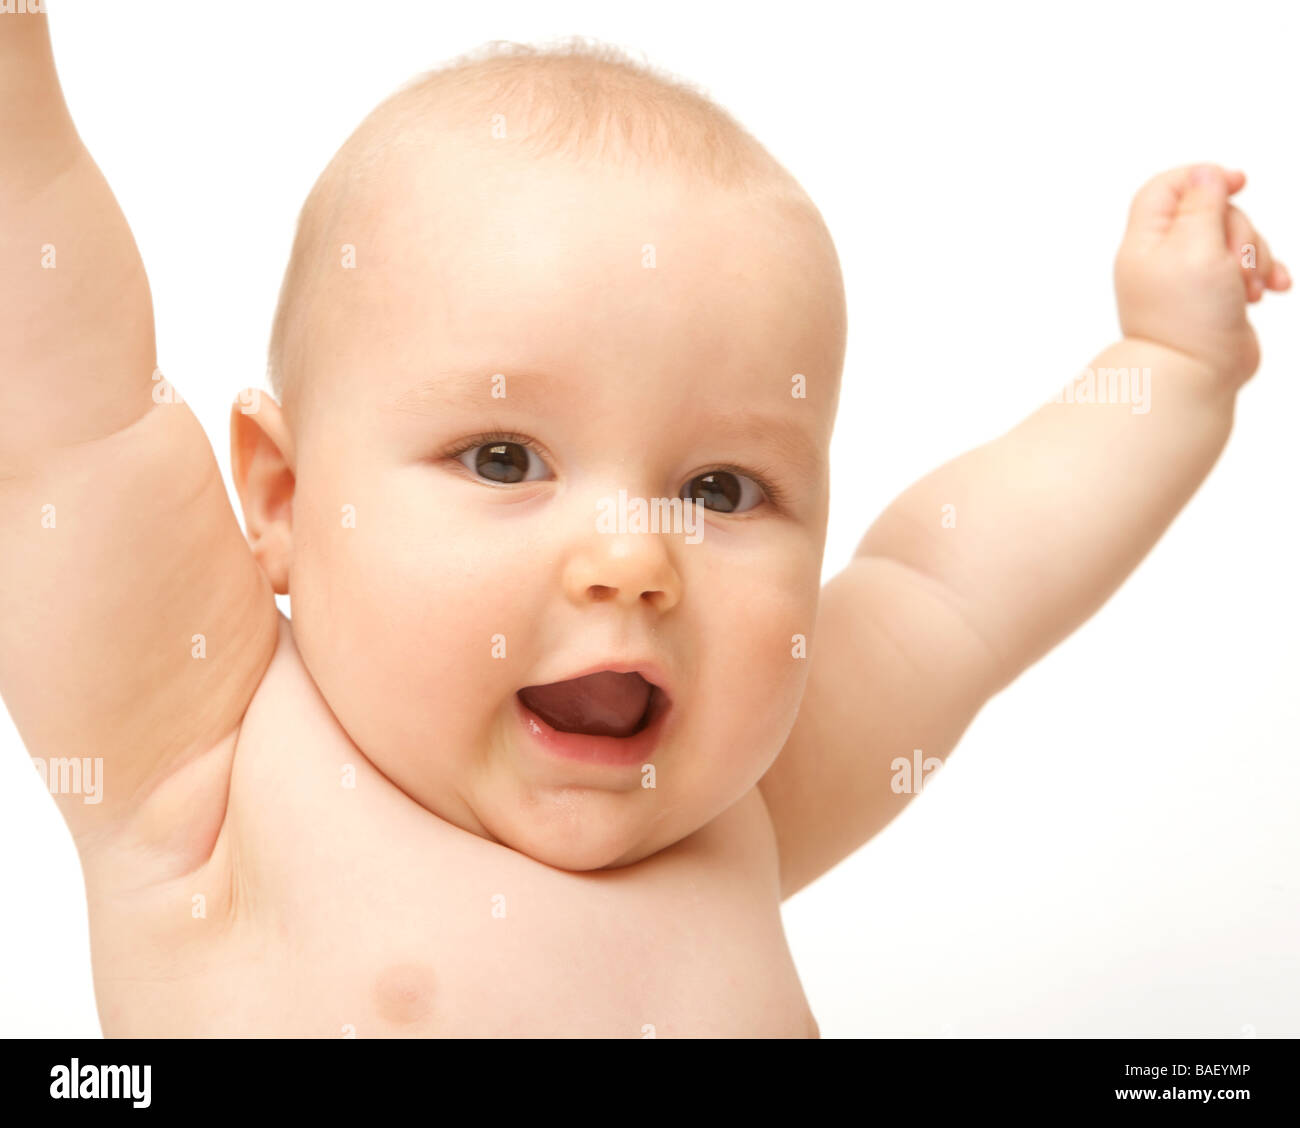 A baby cheers with arms outstretched against a white backdrop wearing a nappy Stock Photo